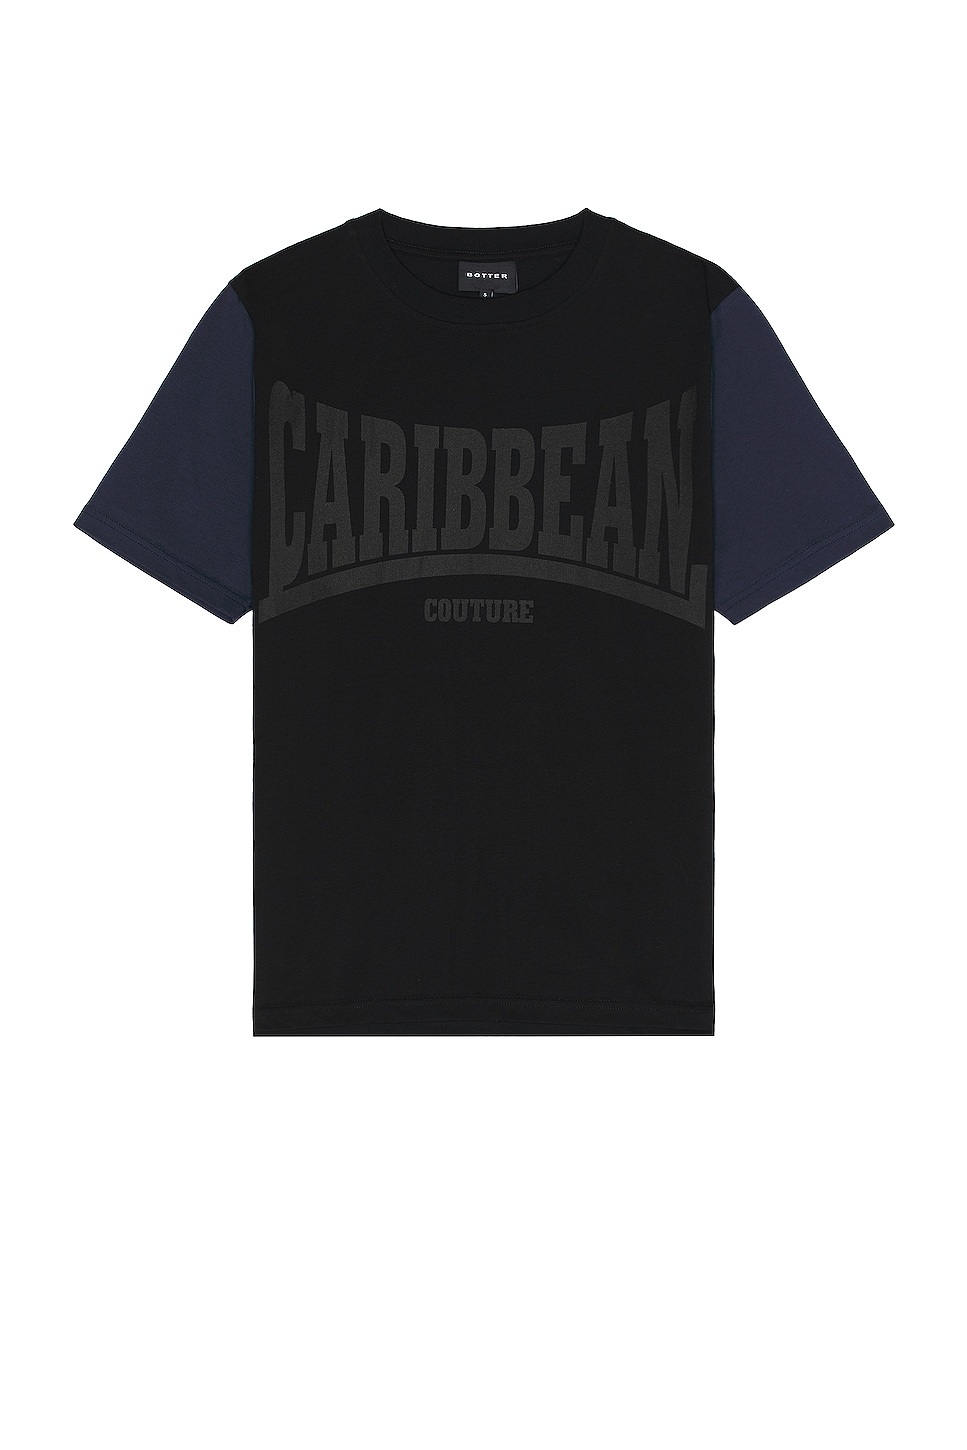 Image 1 of BOTTER Caribbean Couture T-shirt in Black